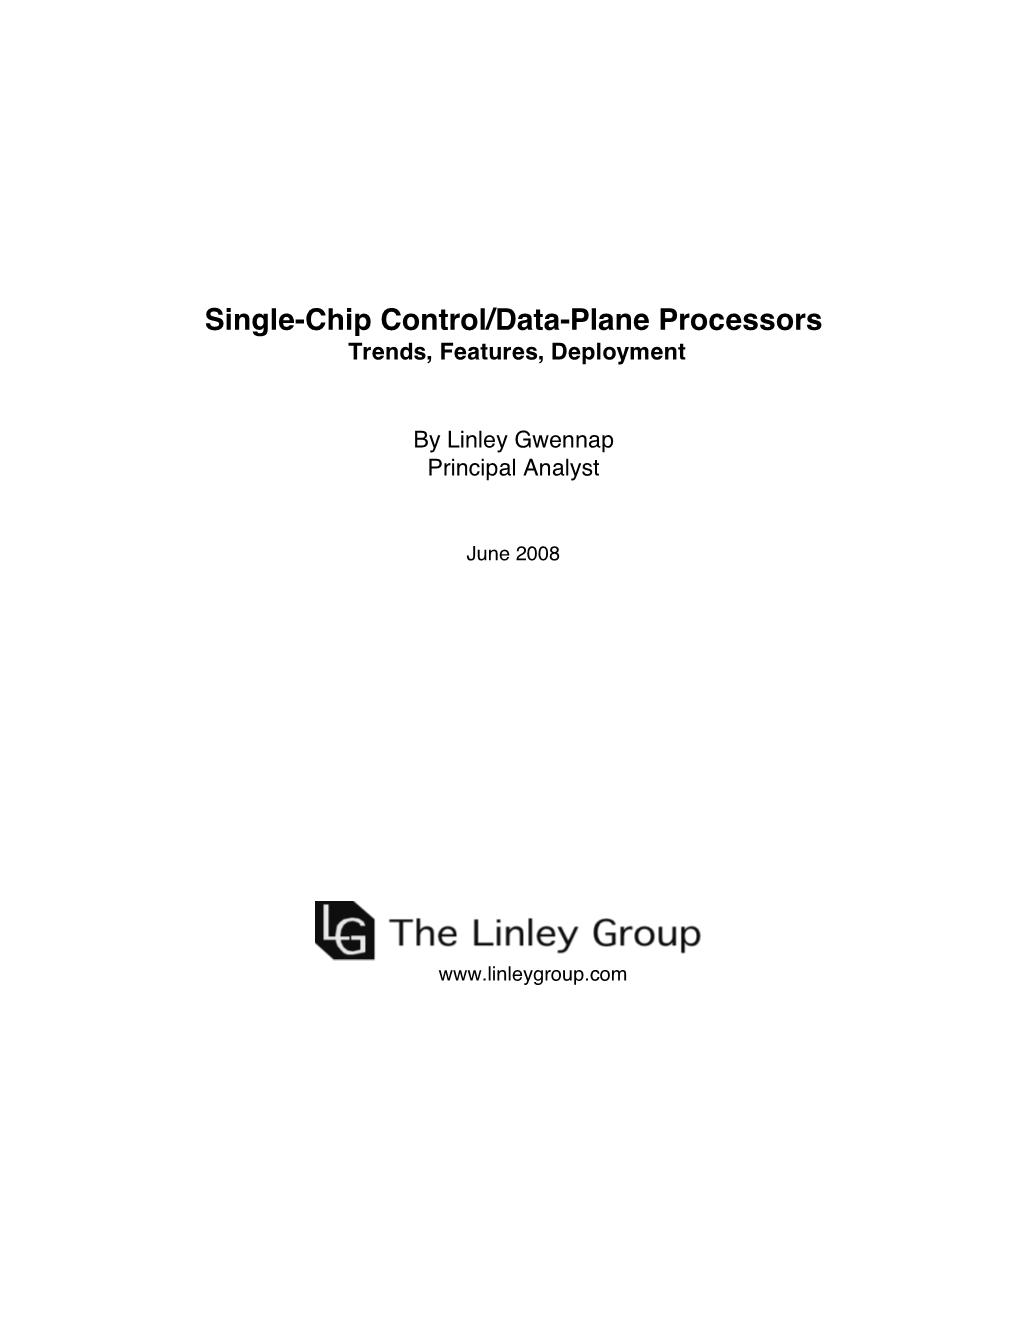 Single-Chip Control/Data-Plane Processors Trends, Features, Deployment